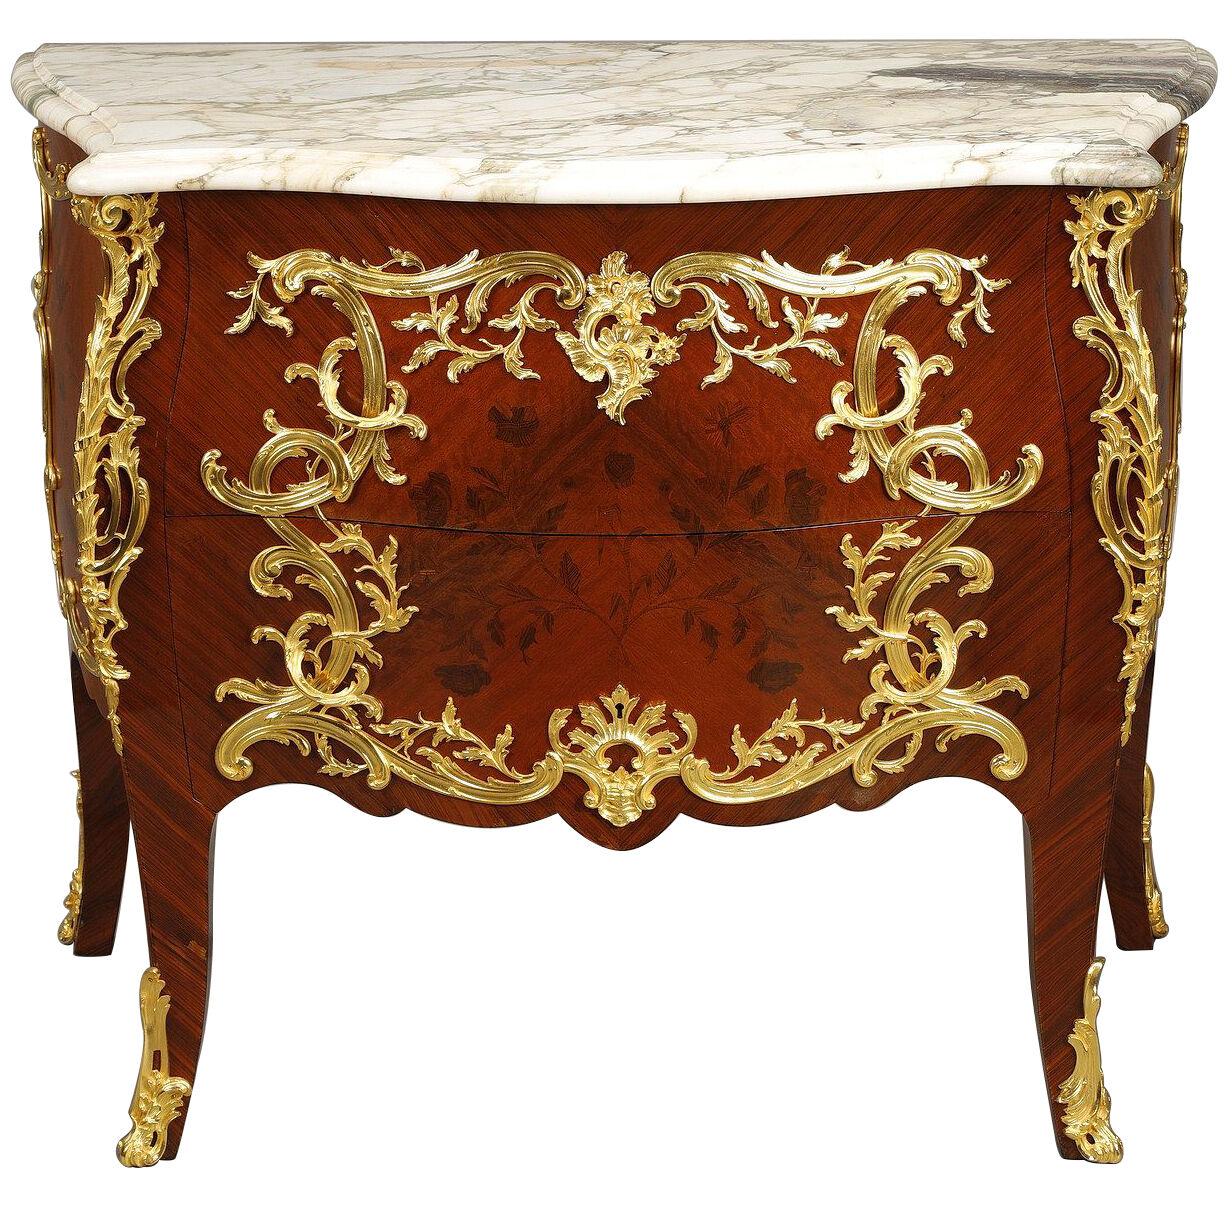 Louis XIV style Commode with marquetry and gilt bronze decorations